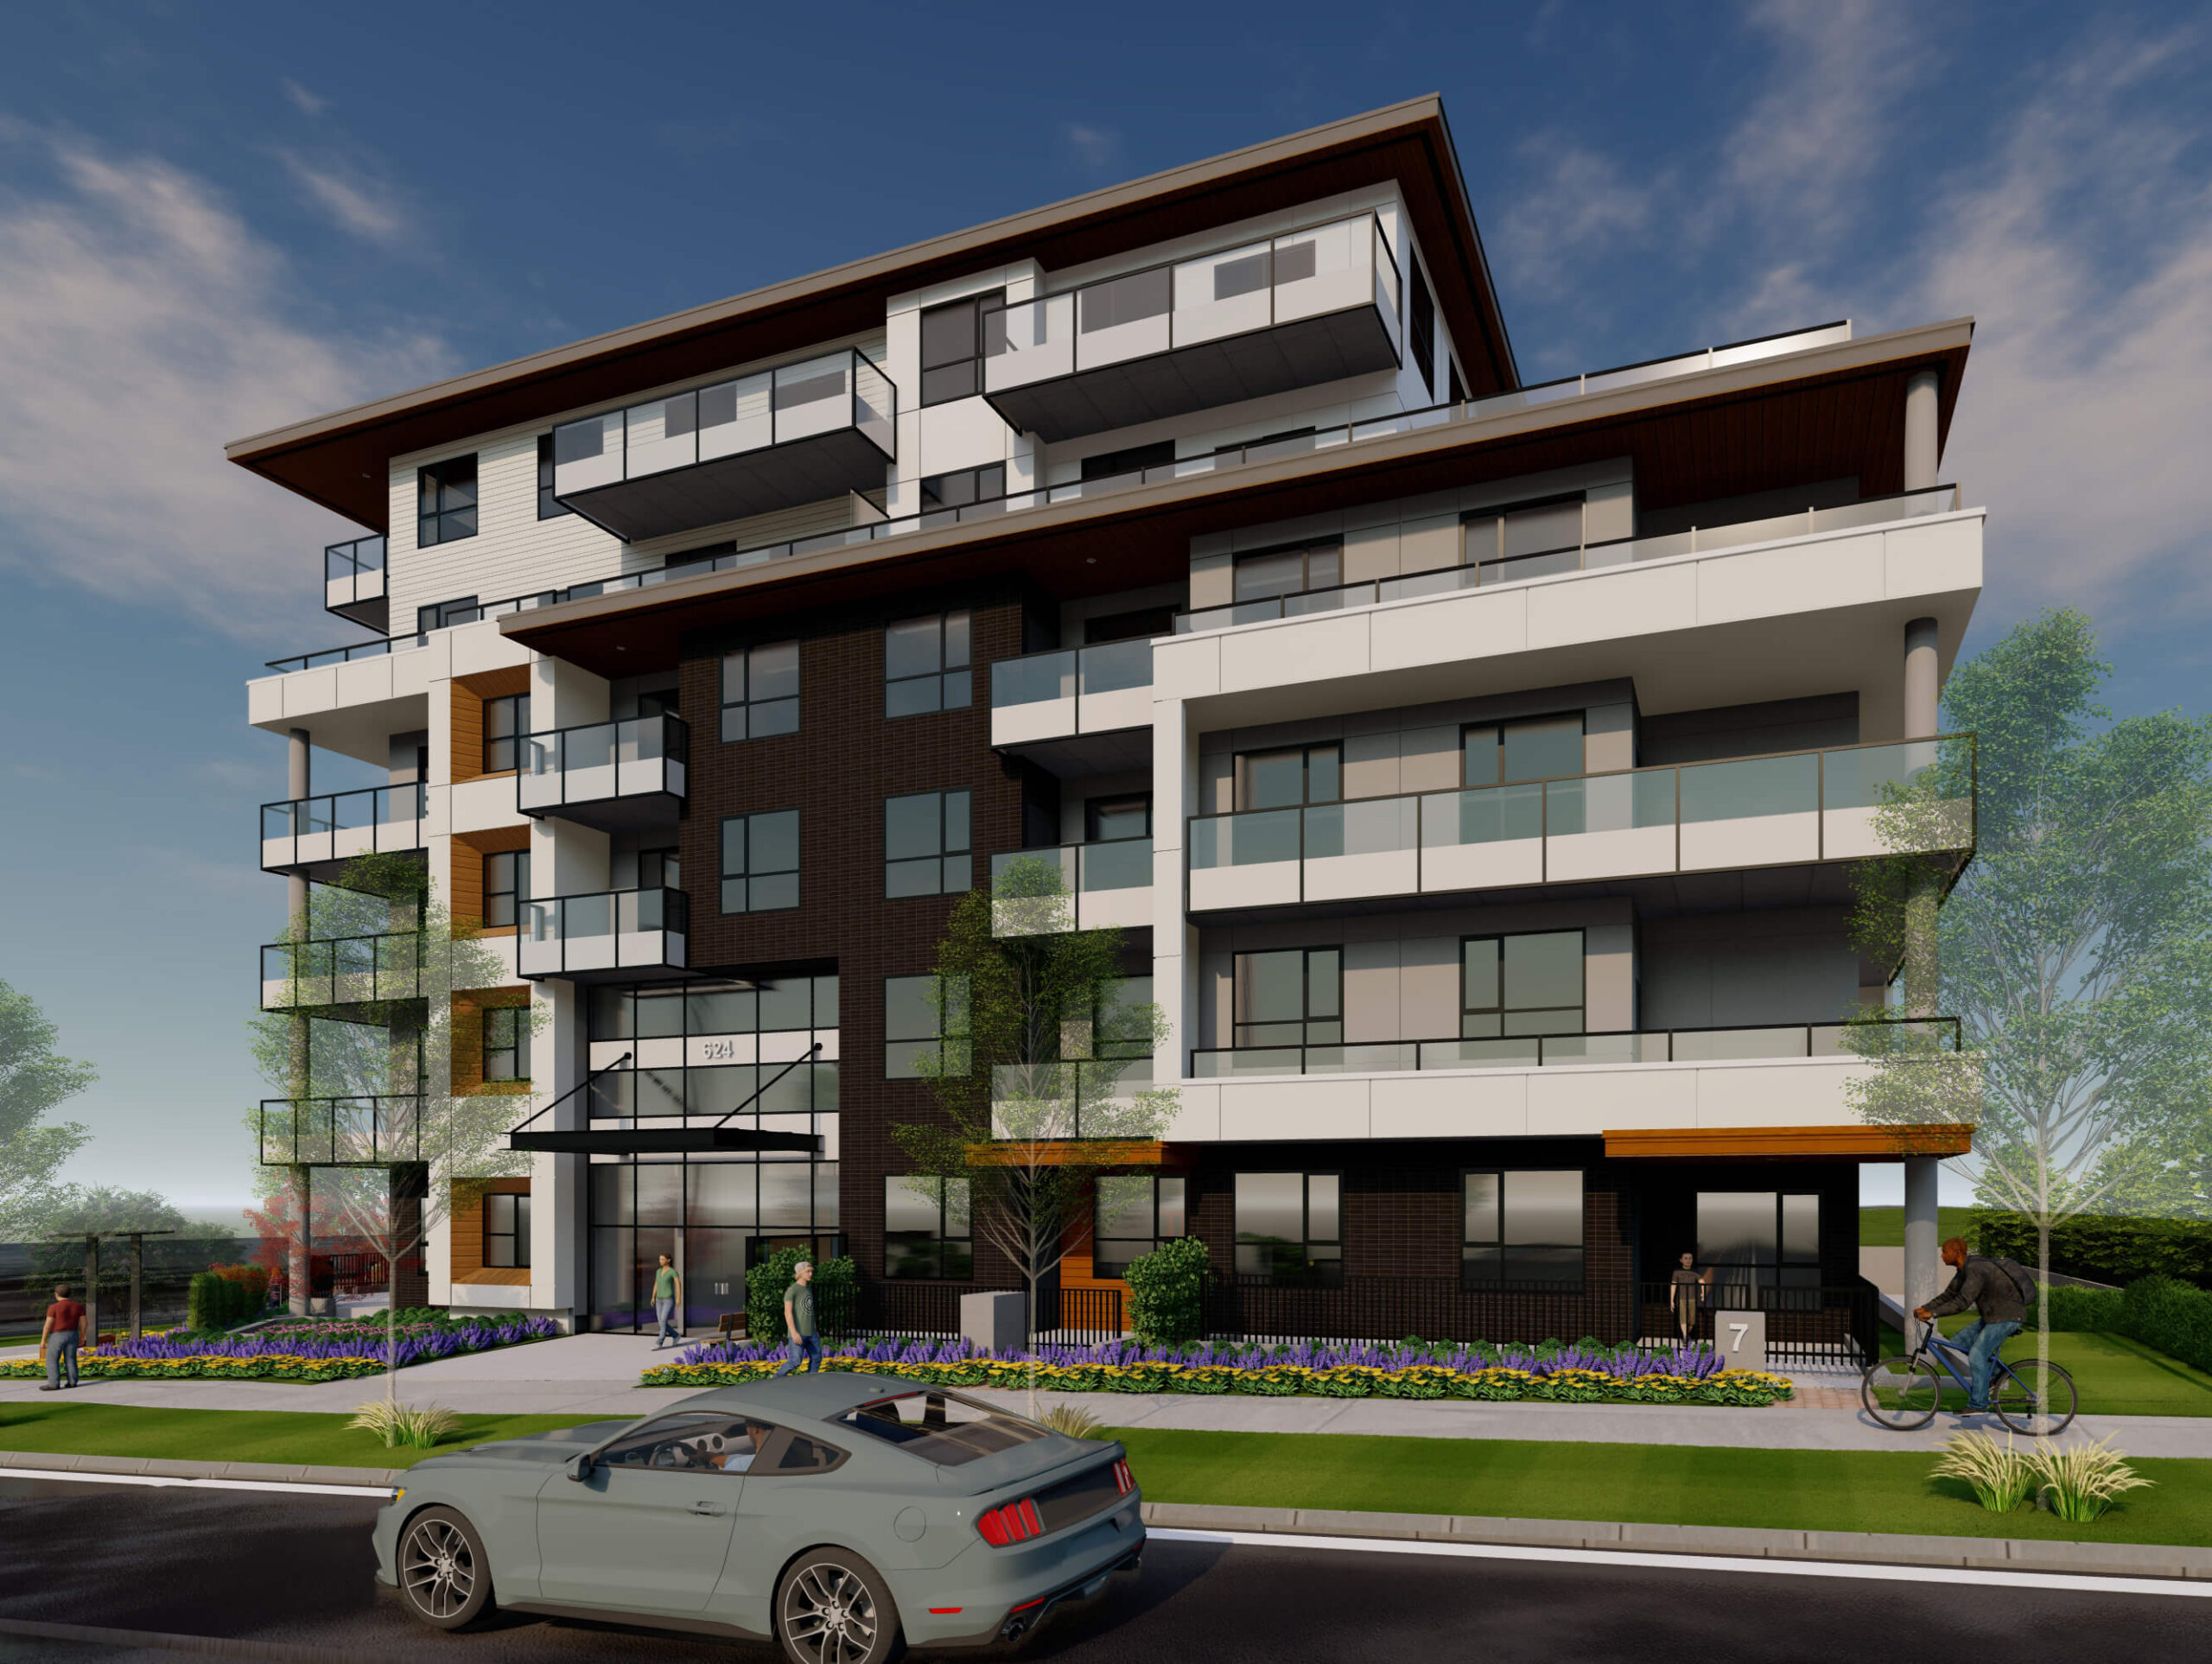 The “Aavand” development is a residential, 80-Unit condo project in Coquitlam. Design by Group 161 | DF Architecture.